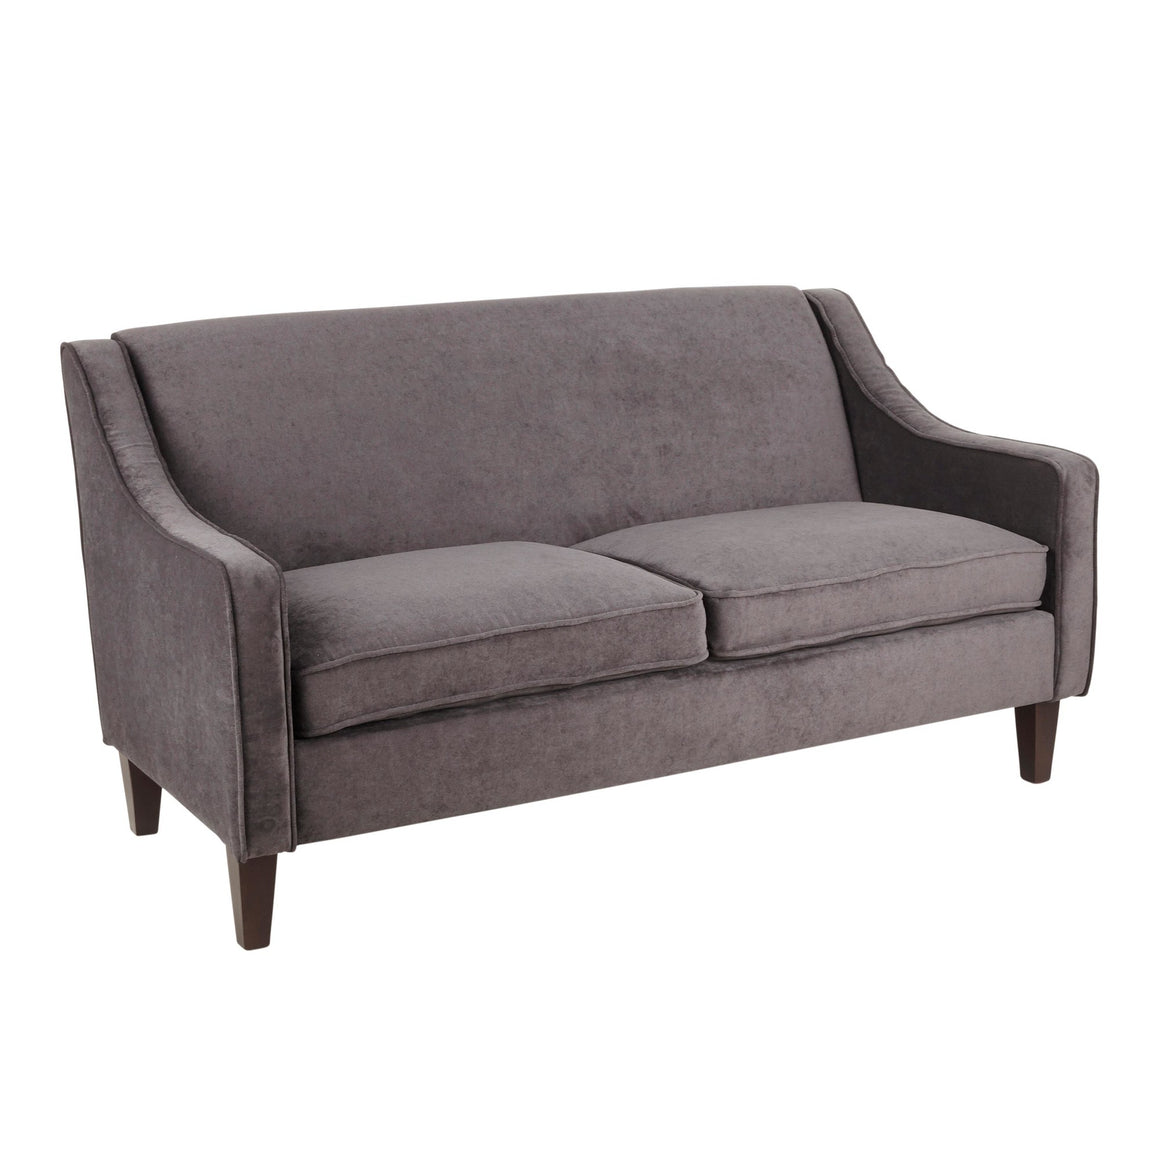 Telluride Contemporary Sofa in Espresso Wood and Black Fabric by LumiSource